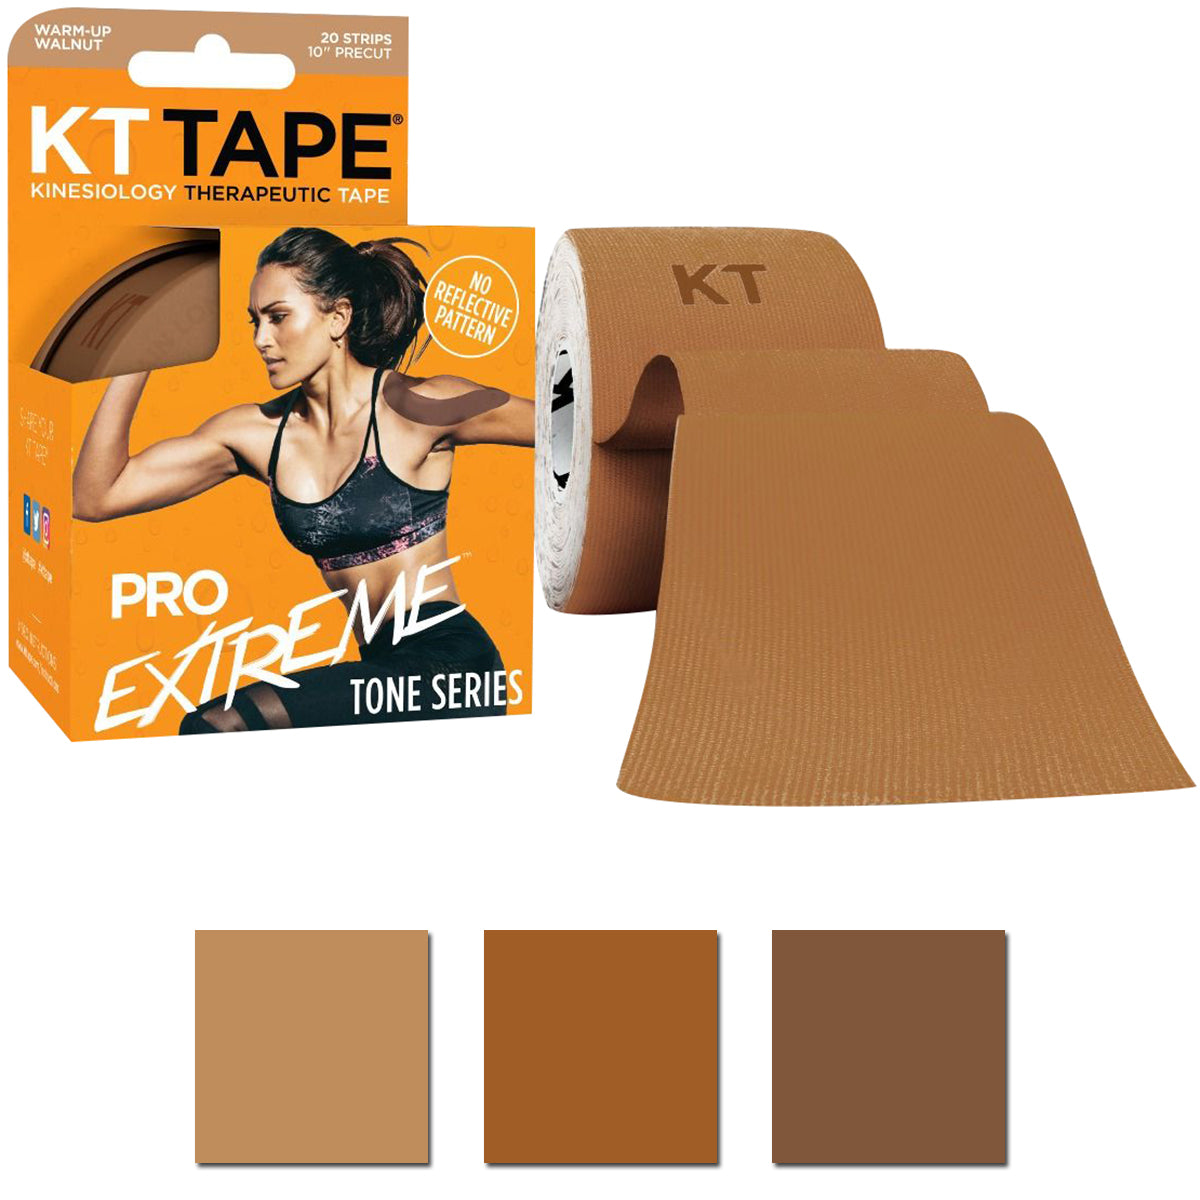 KT Tape Pro Extreme Tone Series 10" Precut Kinesiology Sports Roll - 20 Strips KT Tape